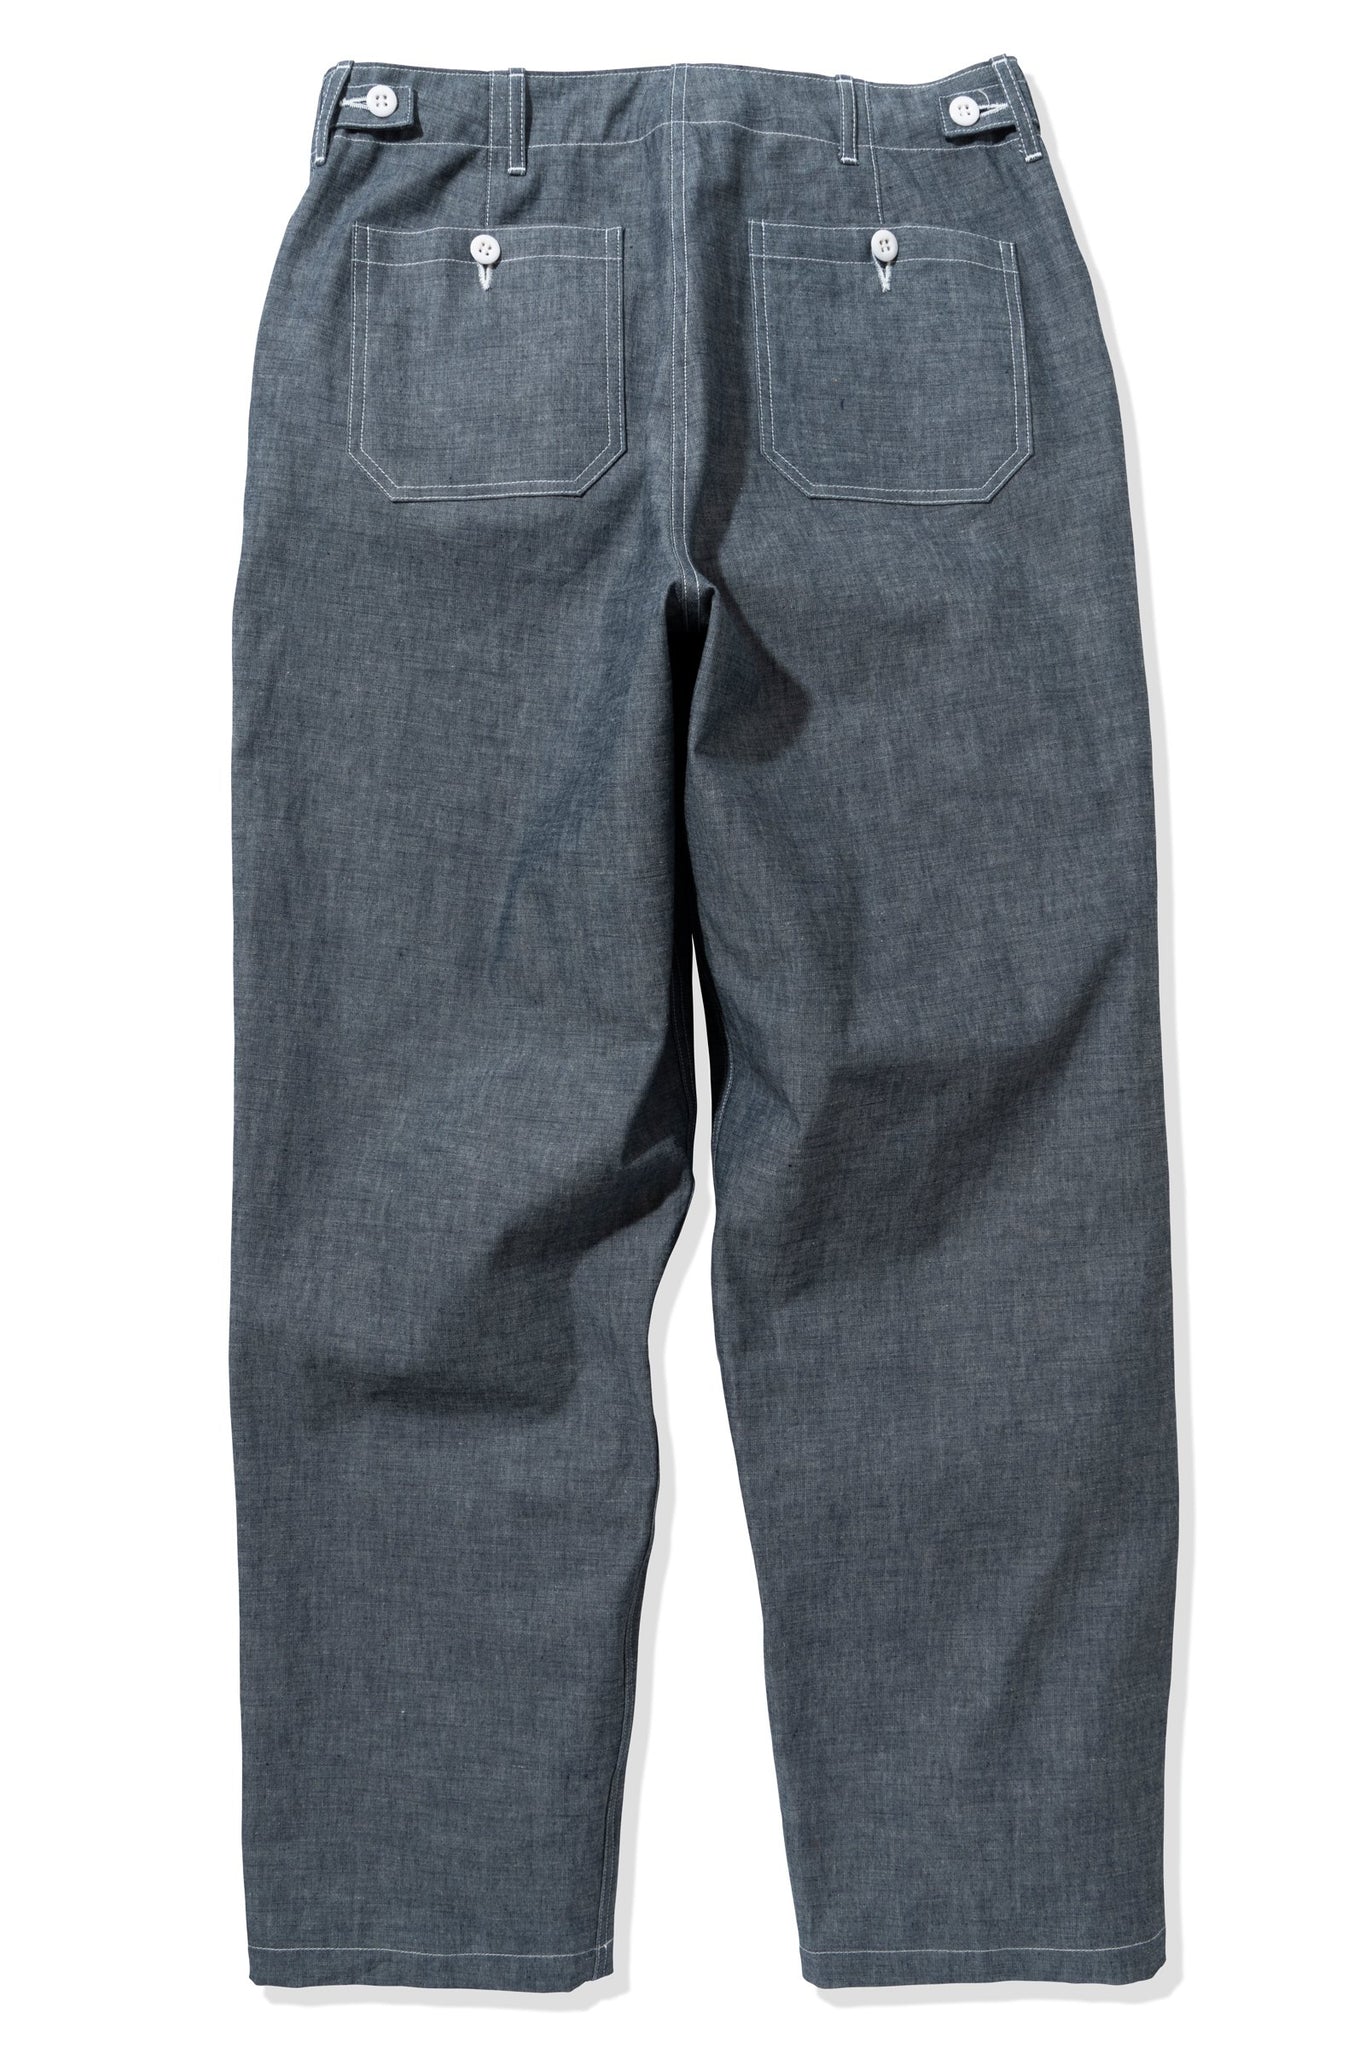 8HU LIGHT CHAMBRAY UTILITY TROUSERS – The Real McCoy's